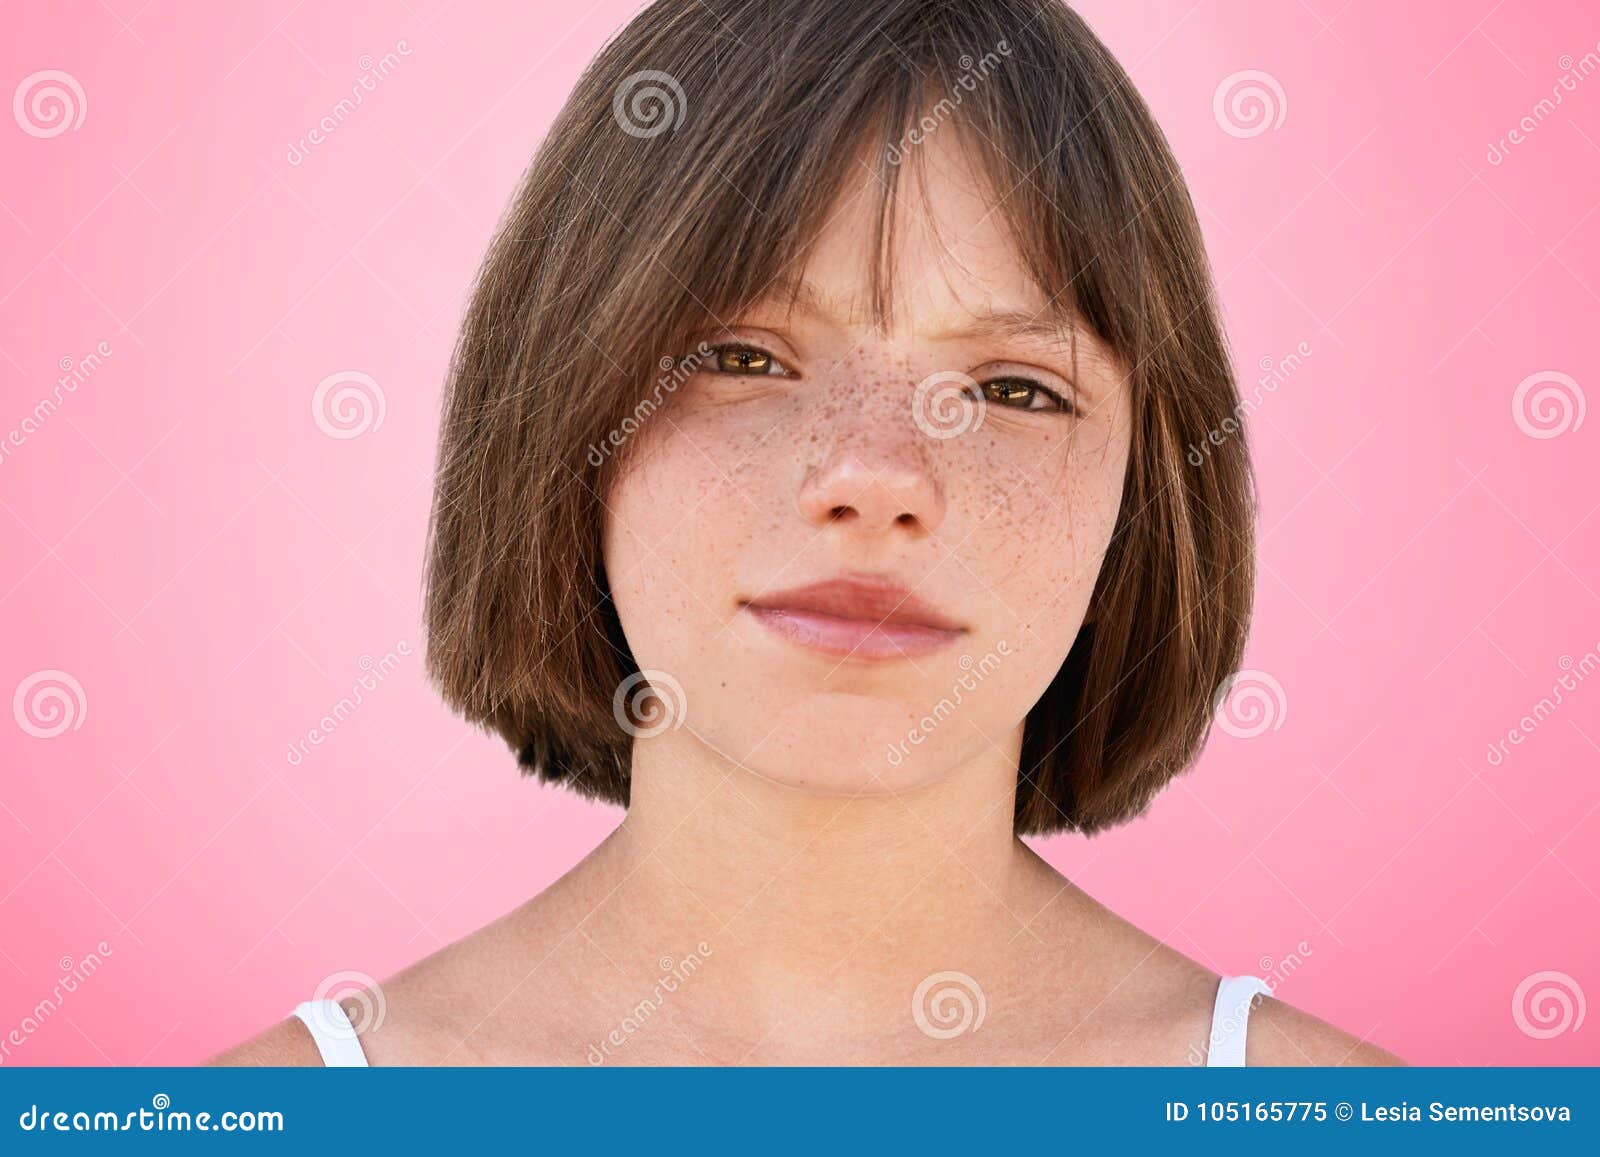 close up portrait of freckled stylish small kid looks with narrow dark eyes directly into camera, has serious expression, 